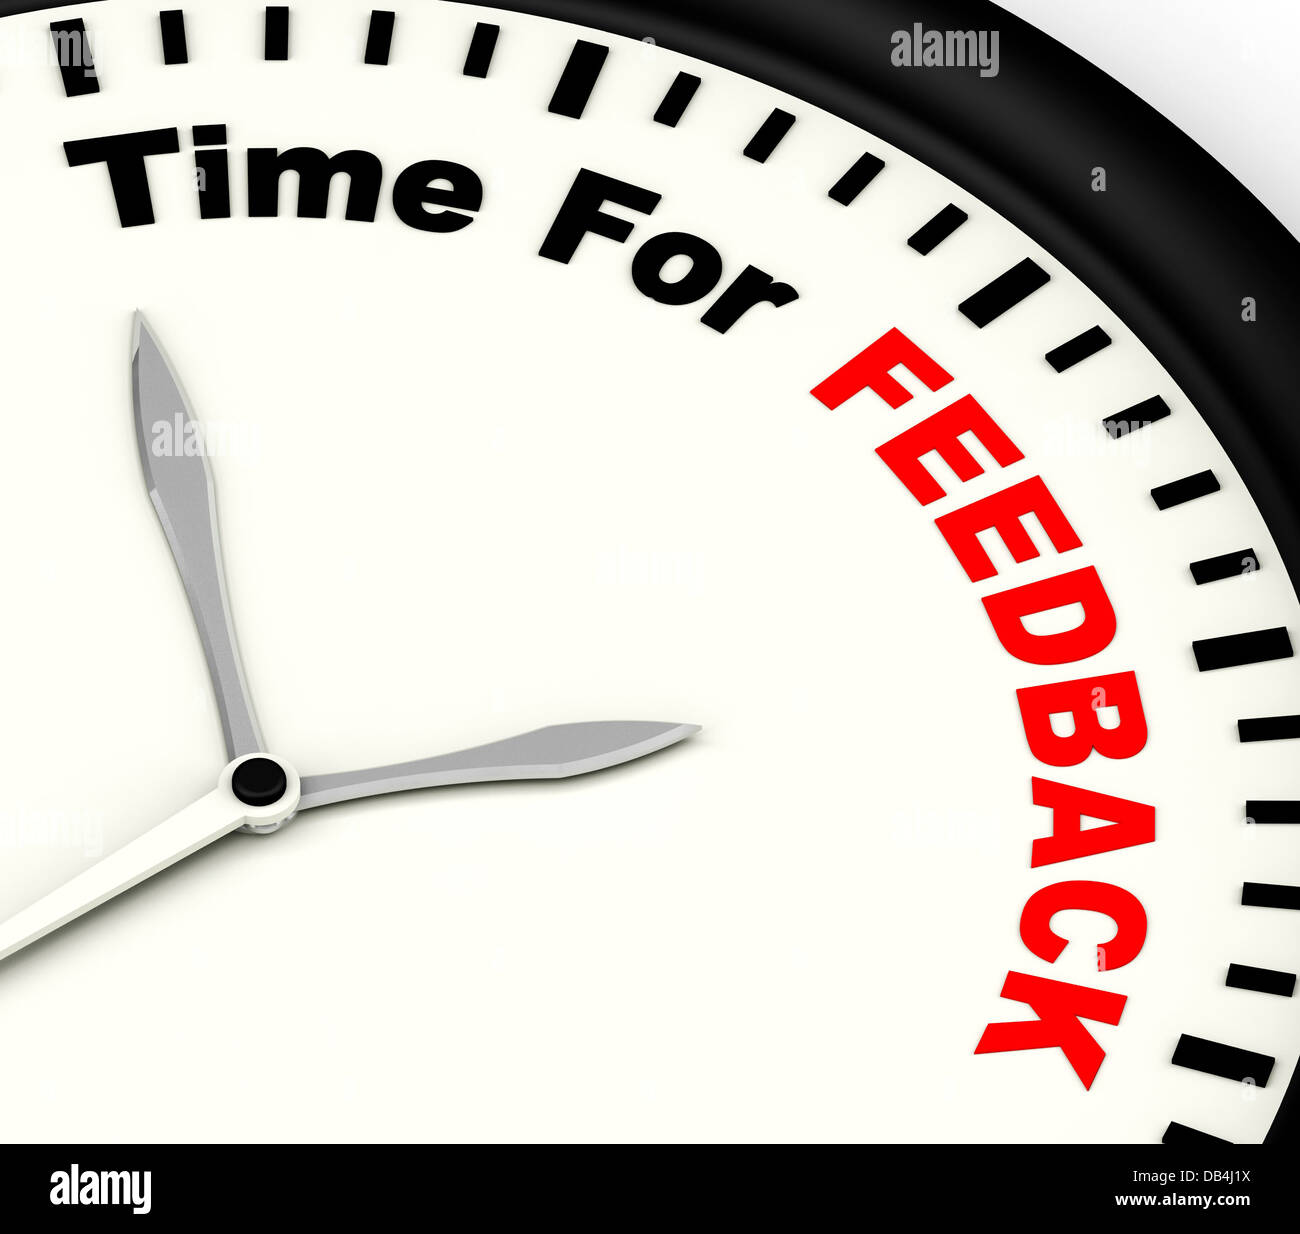 Time For feedback Shows Opinion Evaluation And Surveys Stock Photo